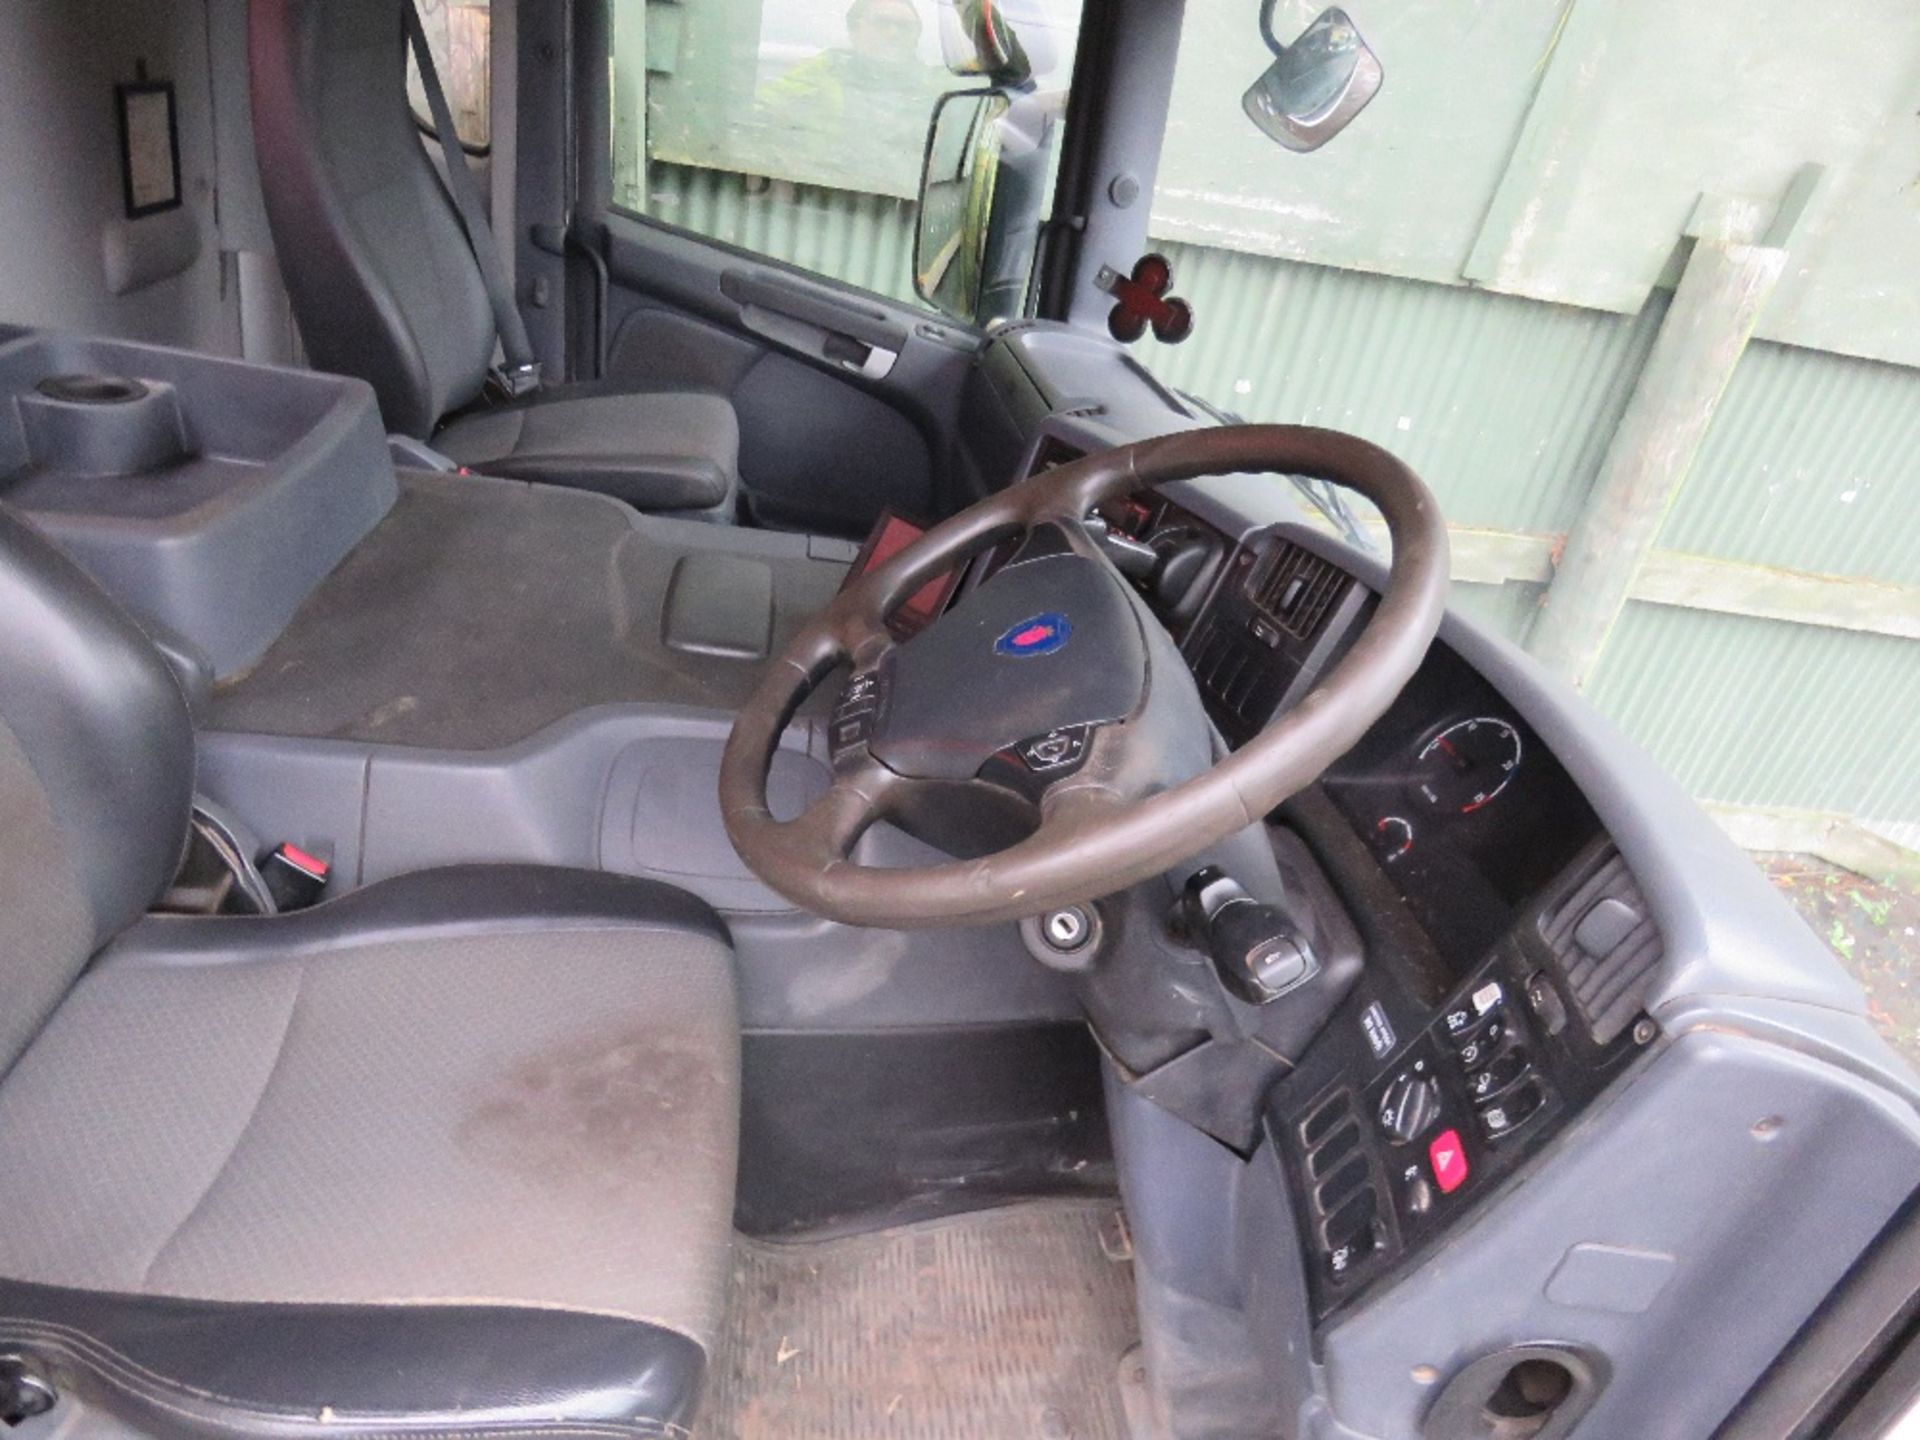 SCANIA P400 8X4 TIPPER LORRY REG:KM62 EHX. SEMI AUTO GEARBOX. 2013 REGISTERED. TESTED TILL MARCH 202 - Image 11 of 12